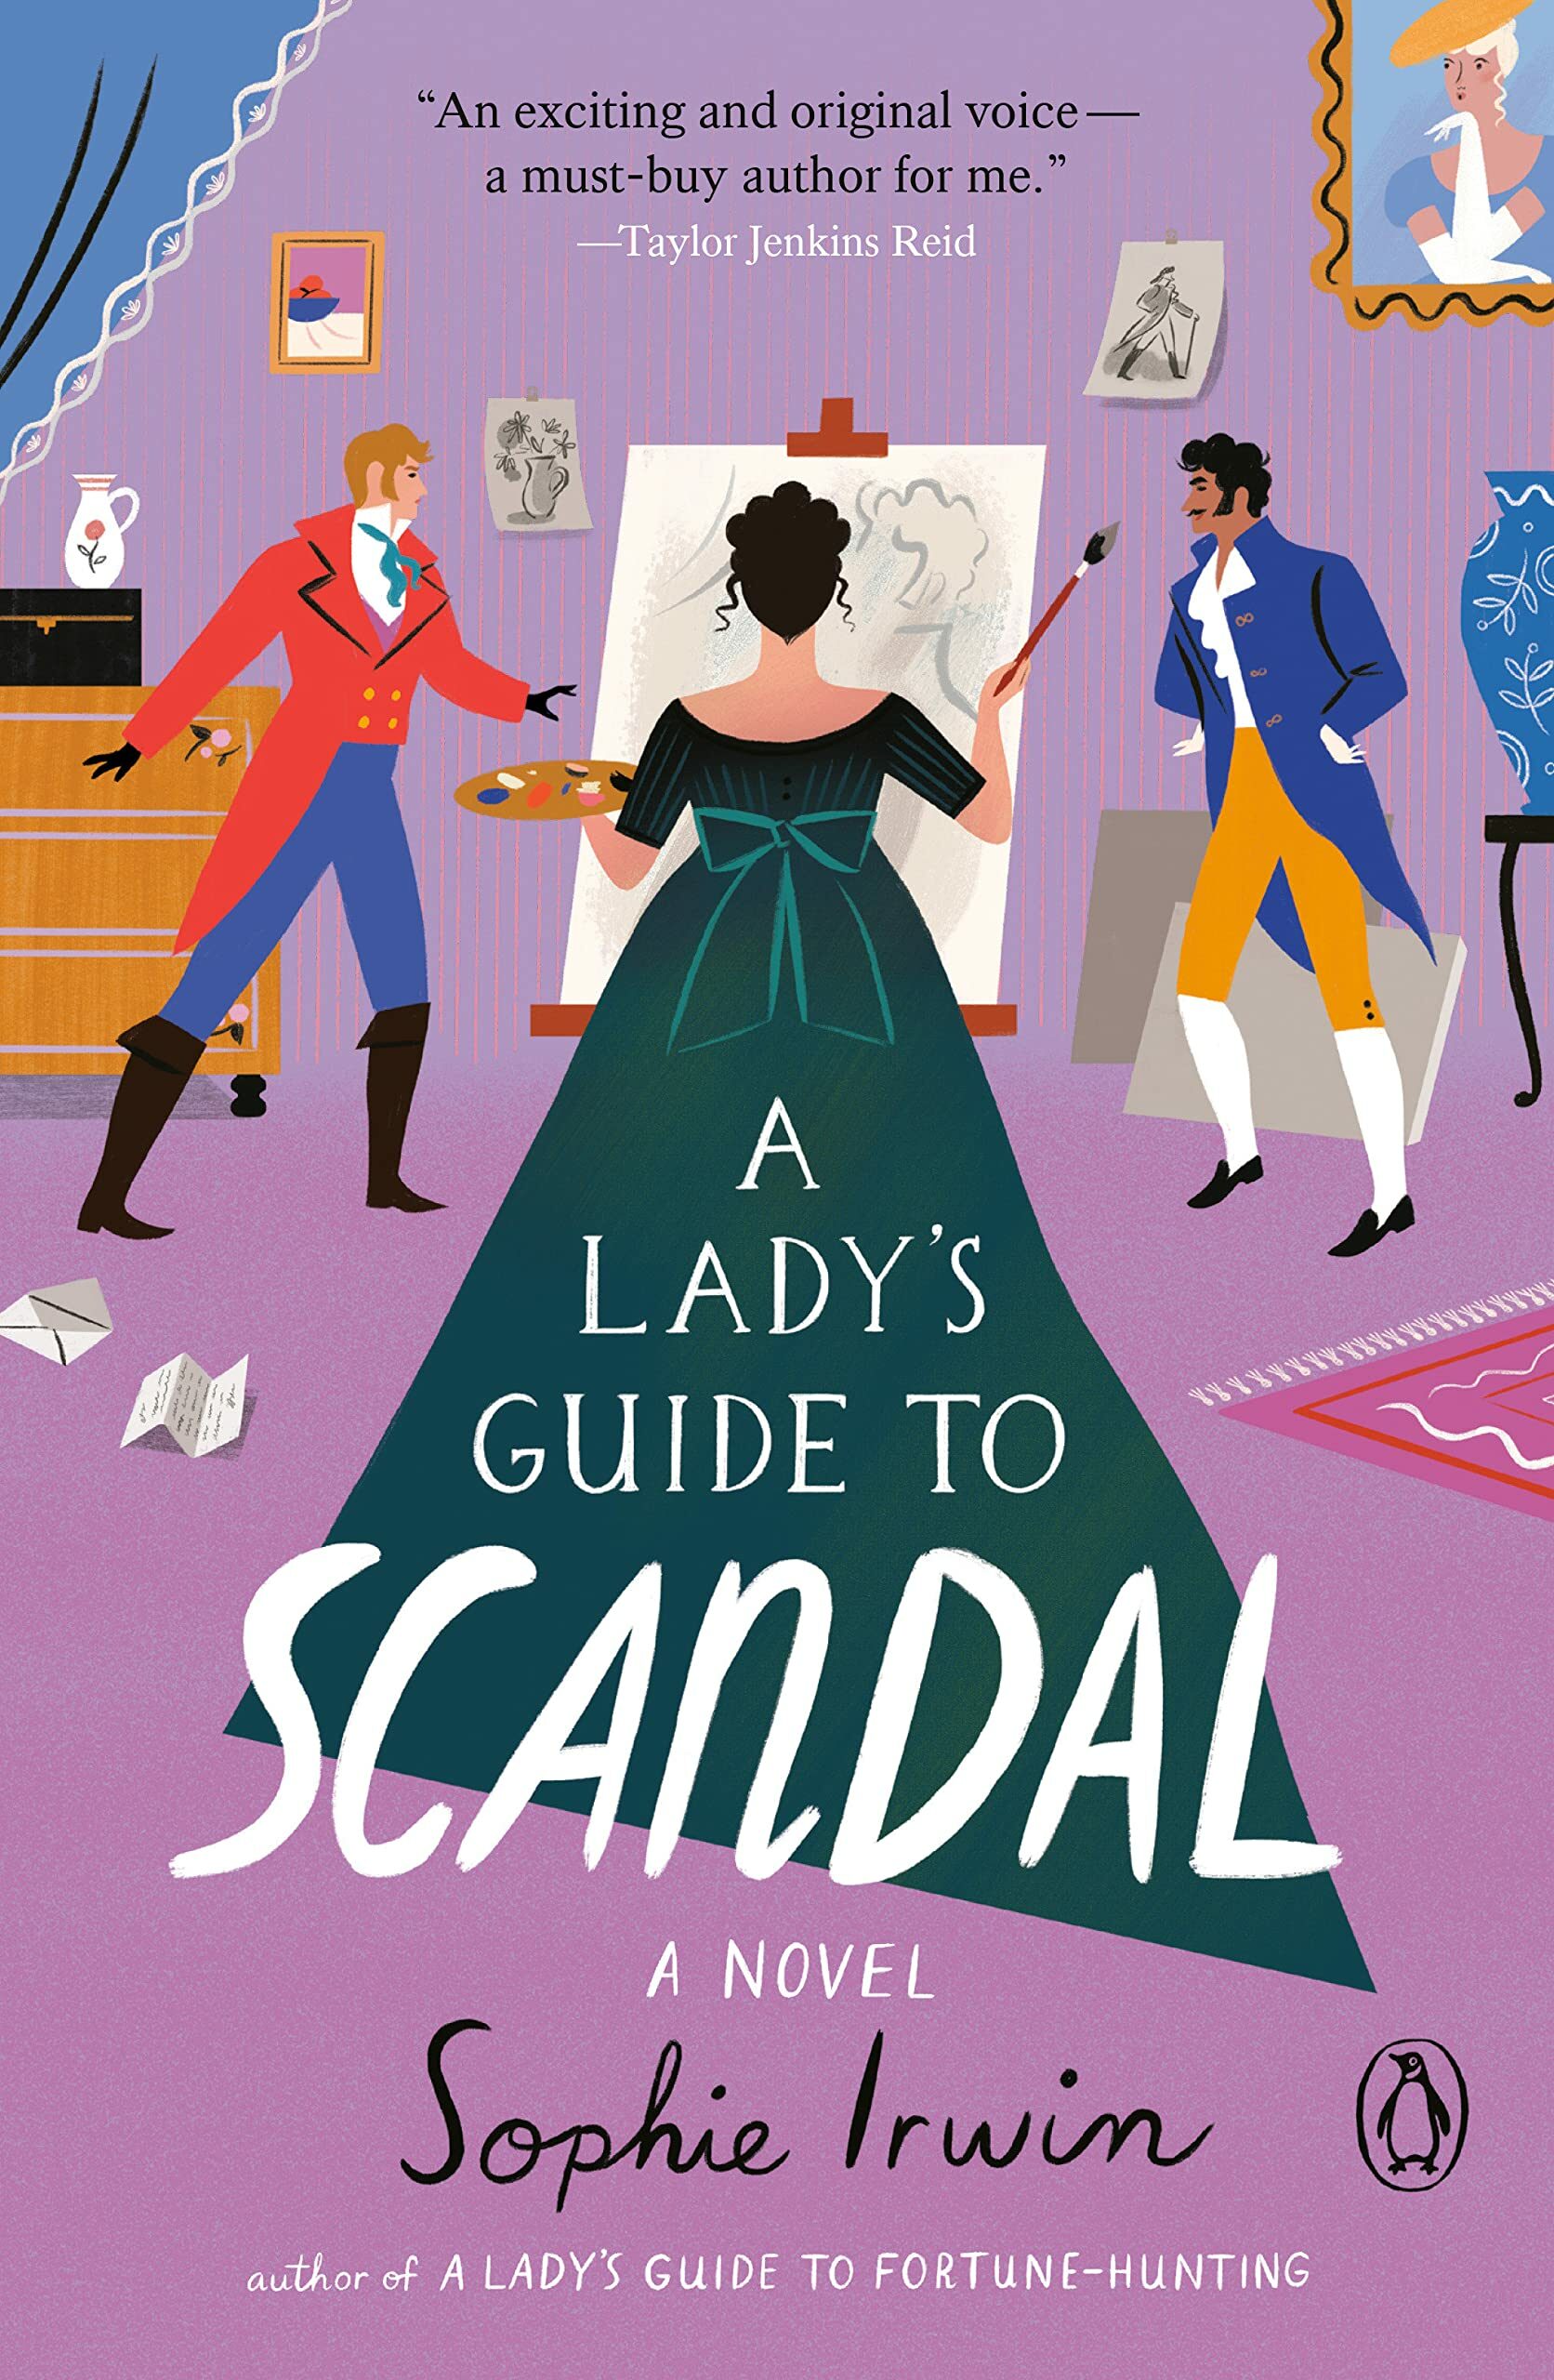 A Lady's Guide #2 A Lady's Guide to Scandal